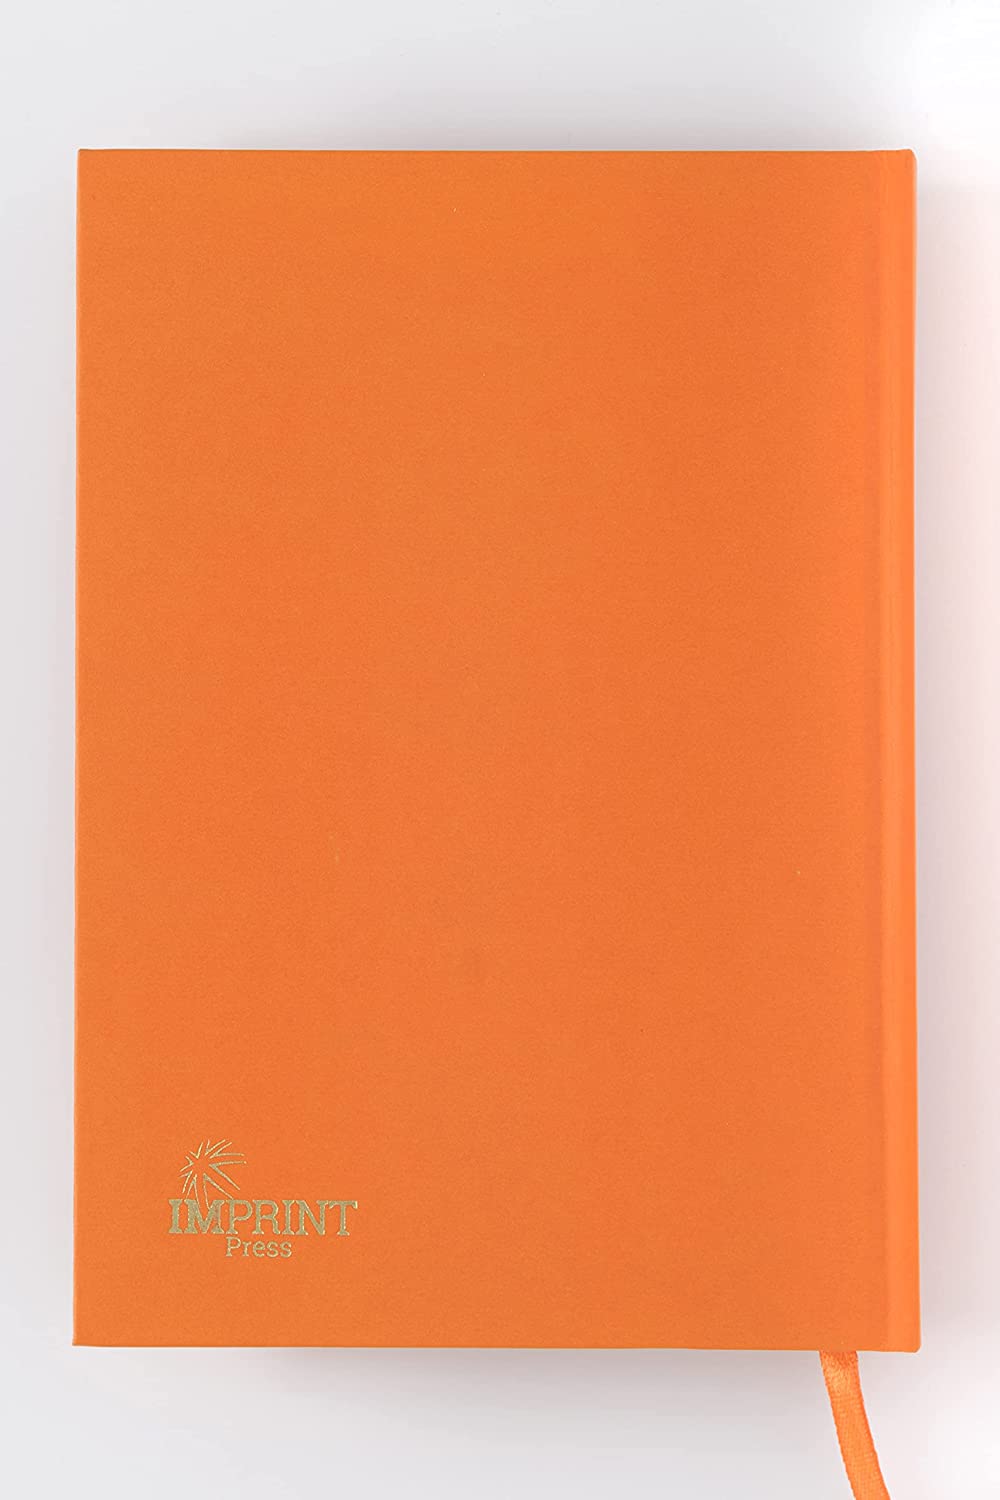 Imprint Press A4 Size Week To View 2022-2023 Diary Orange RRP 4.99 CLEARANCE XL 59p or 2 for 1